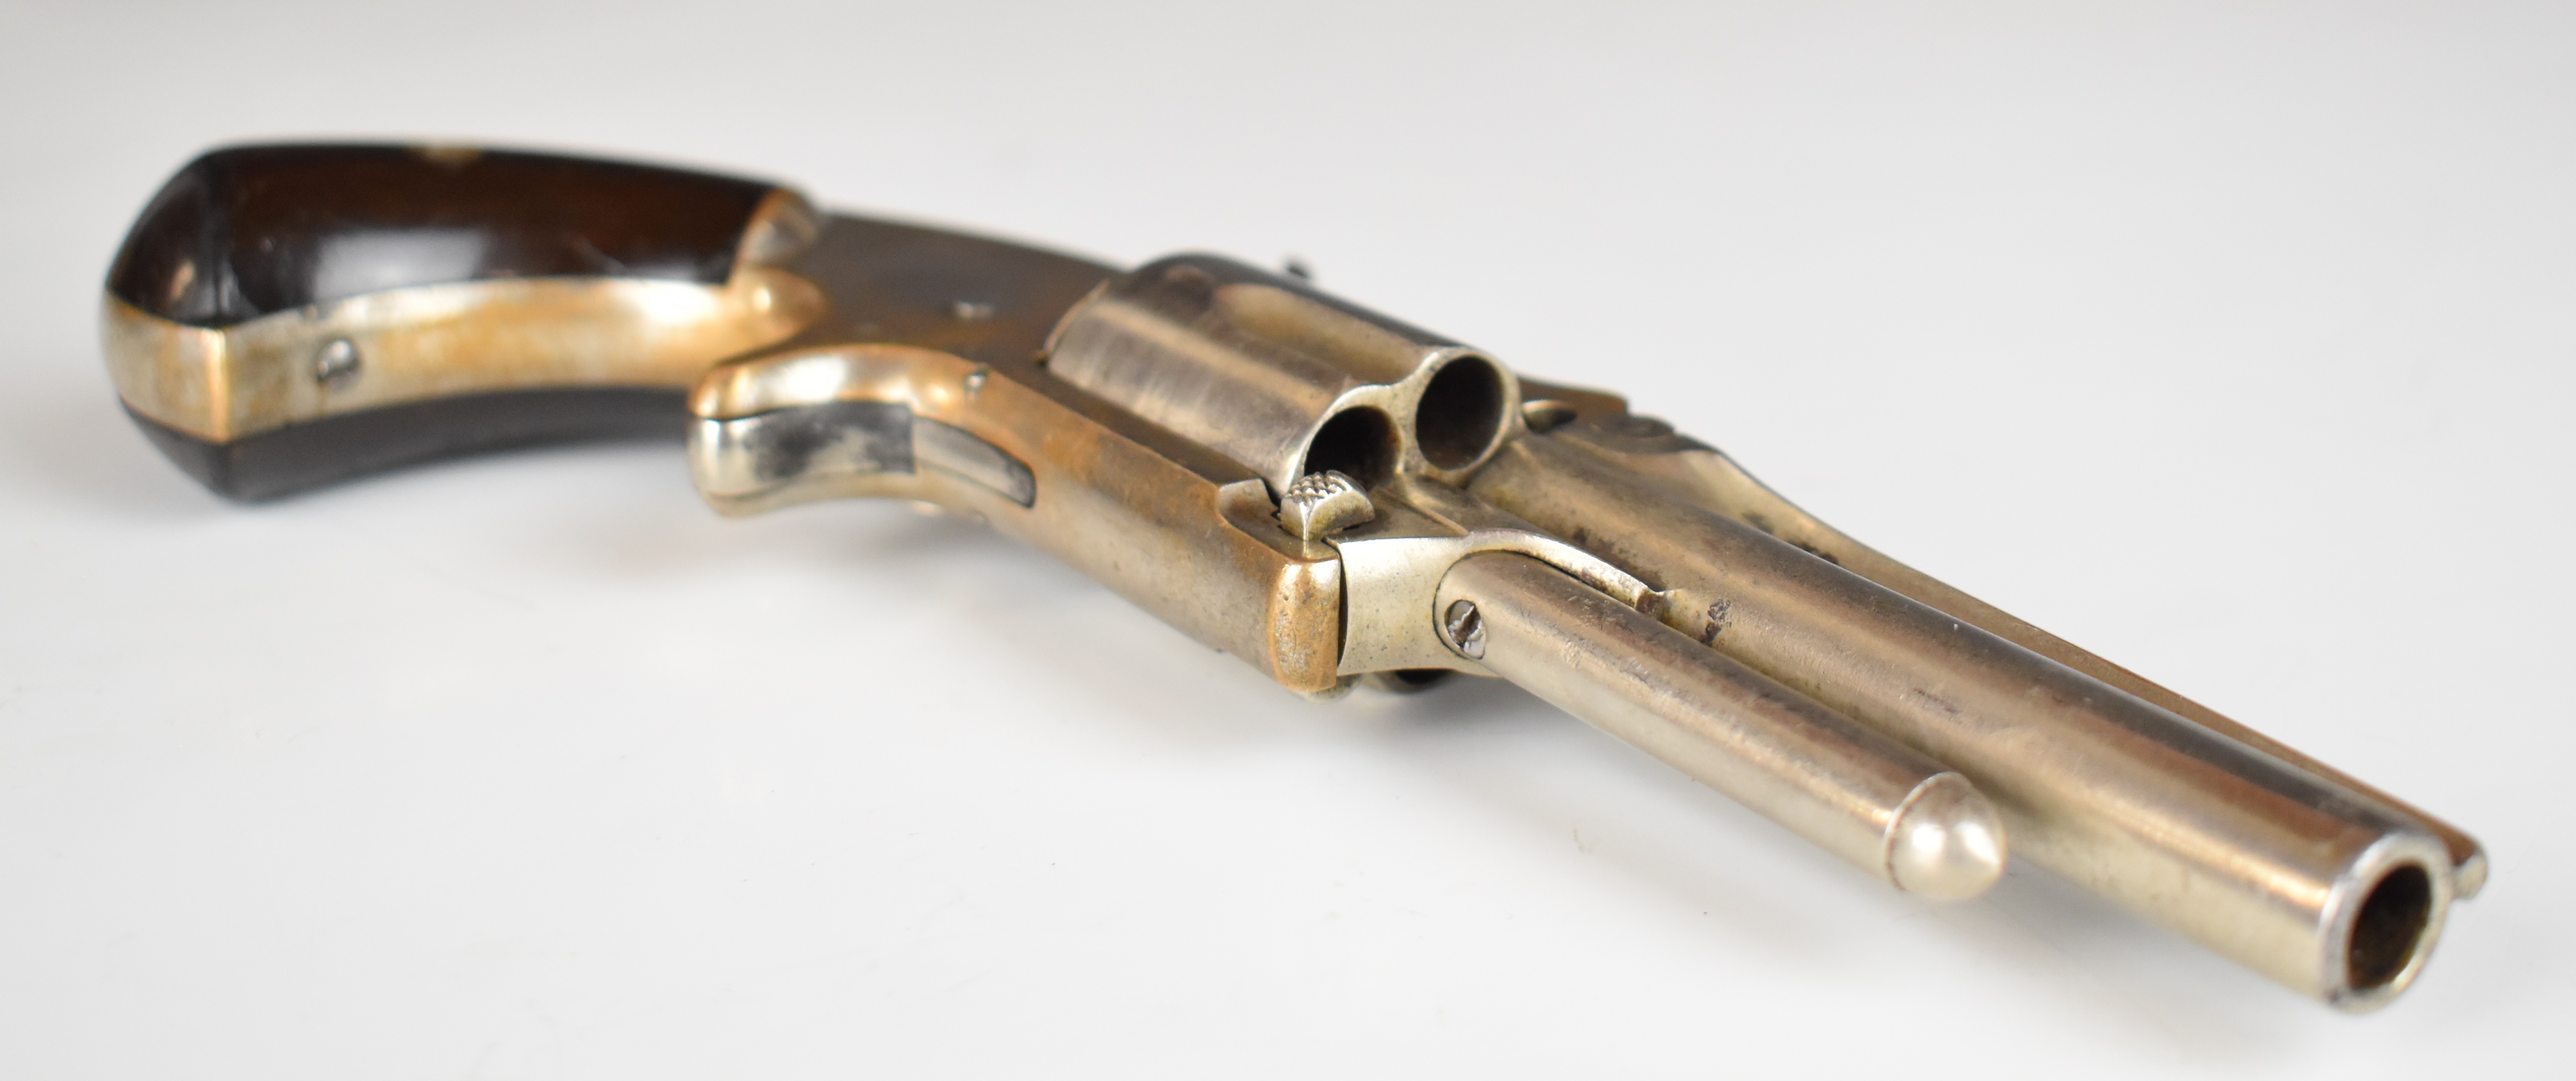 J M Marlin No 82 Standard .32 rimfire five-shot single-action revolver with nickel plated frame, - Image 4 of 13